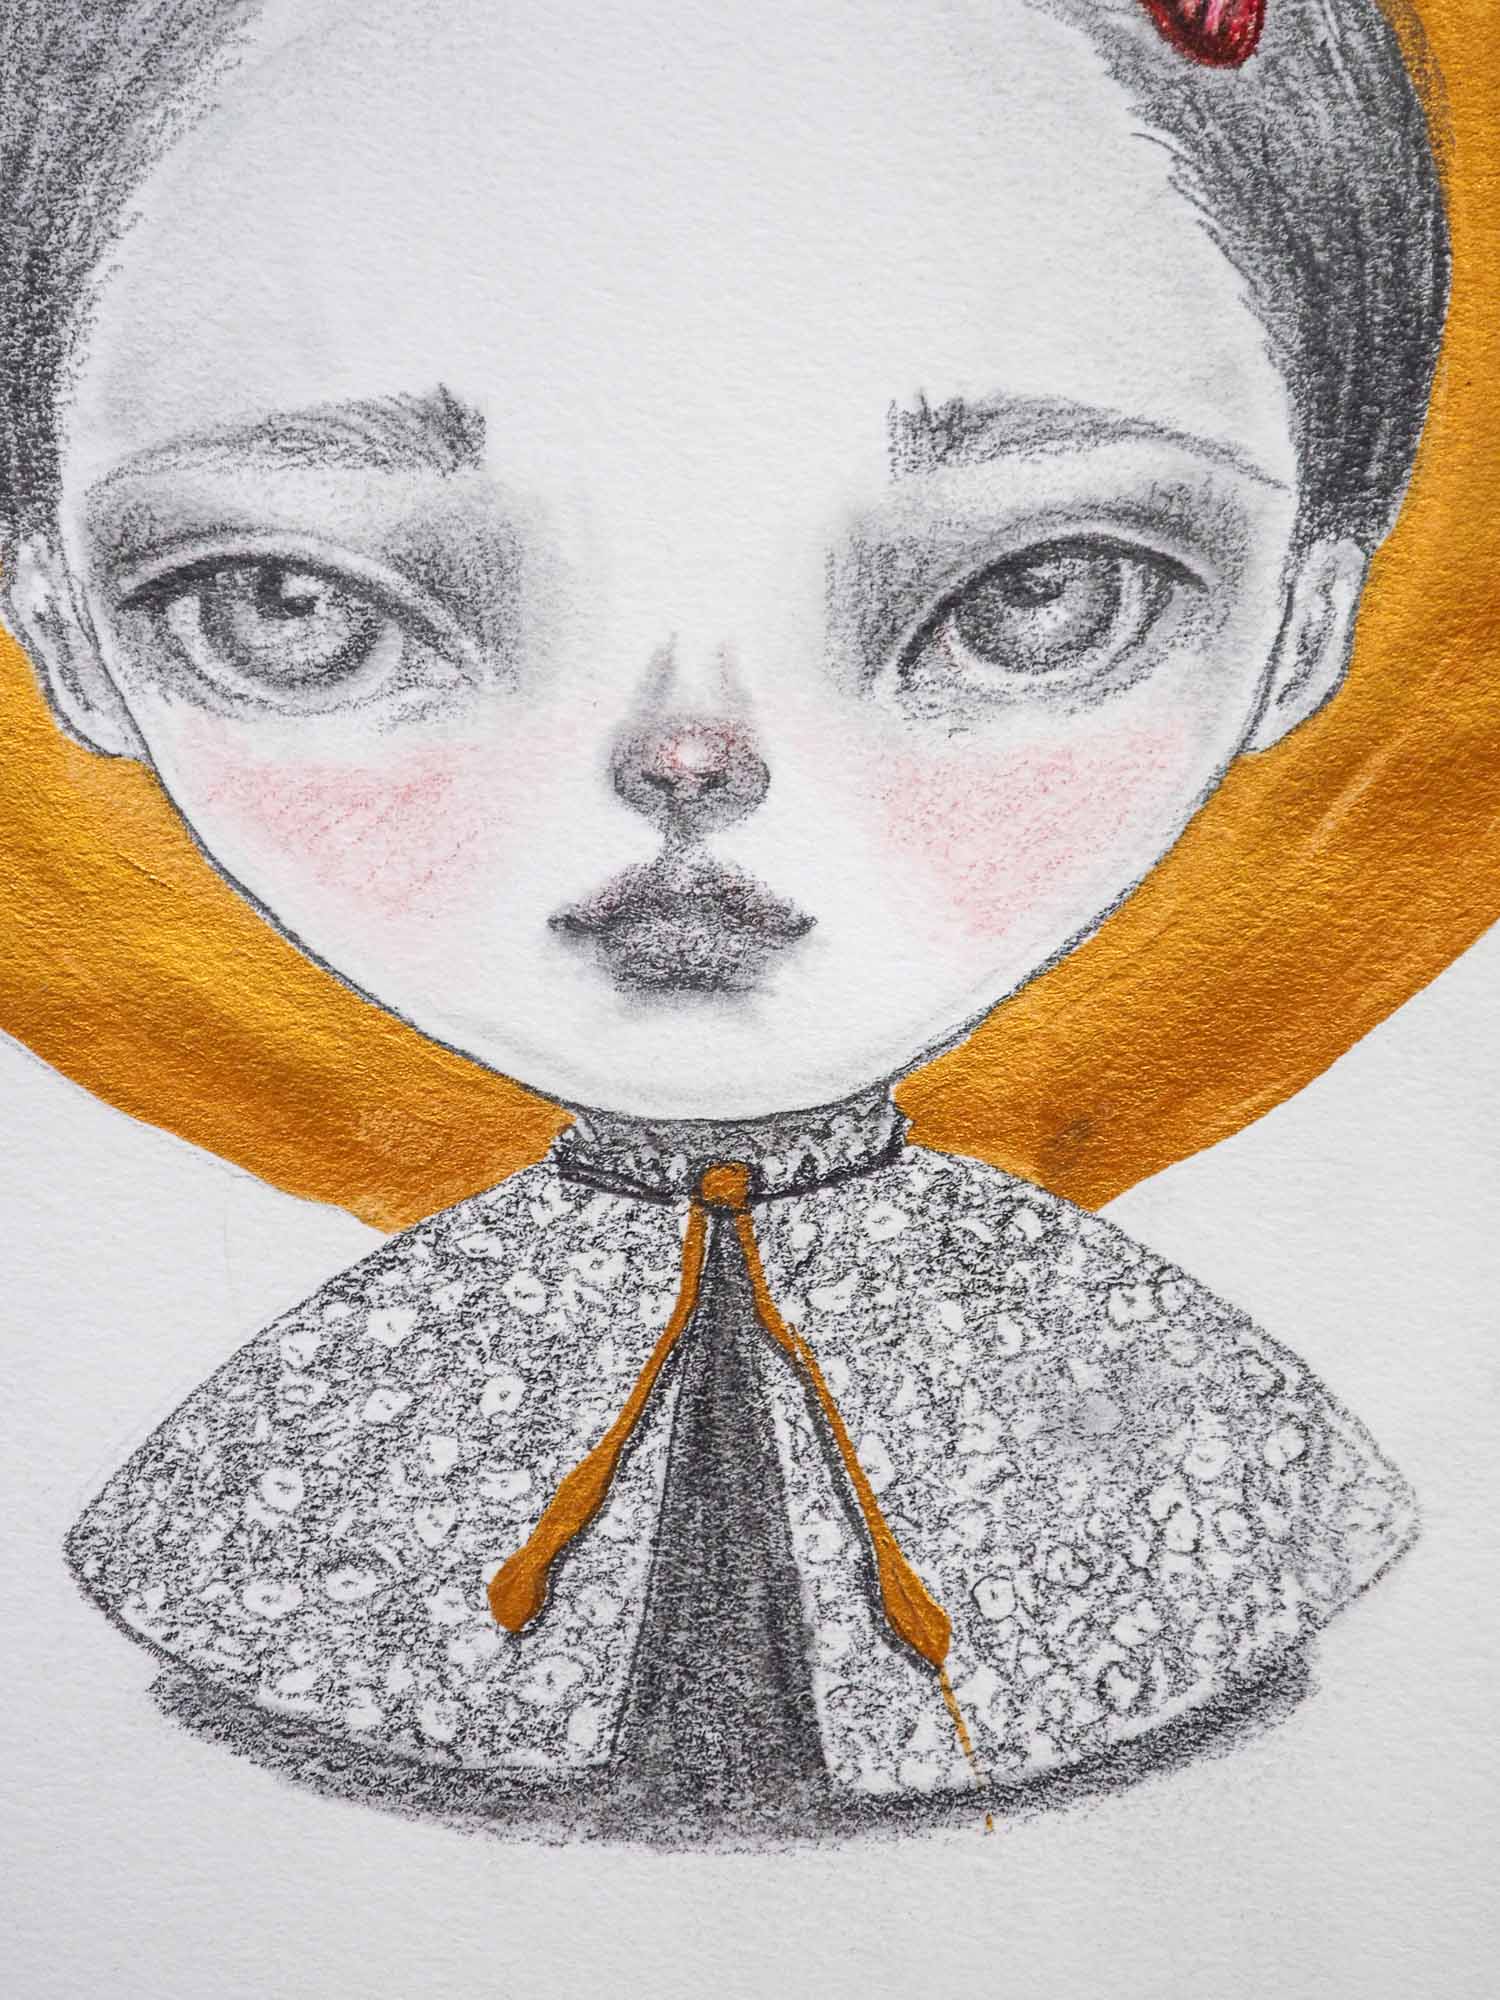 Original mixed media illustration in Pencil, watercolor, gouache and ink by Danita Art. A beautiful girl with deep mesmerizing and expressive eyes has a red butterfly perched on her head like a brooch.